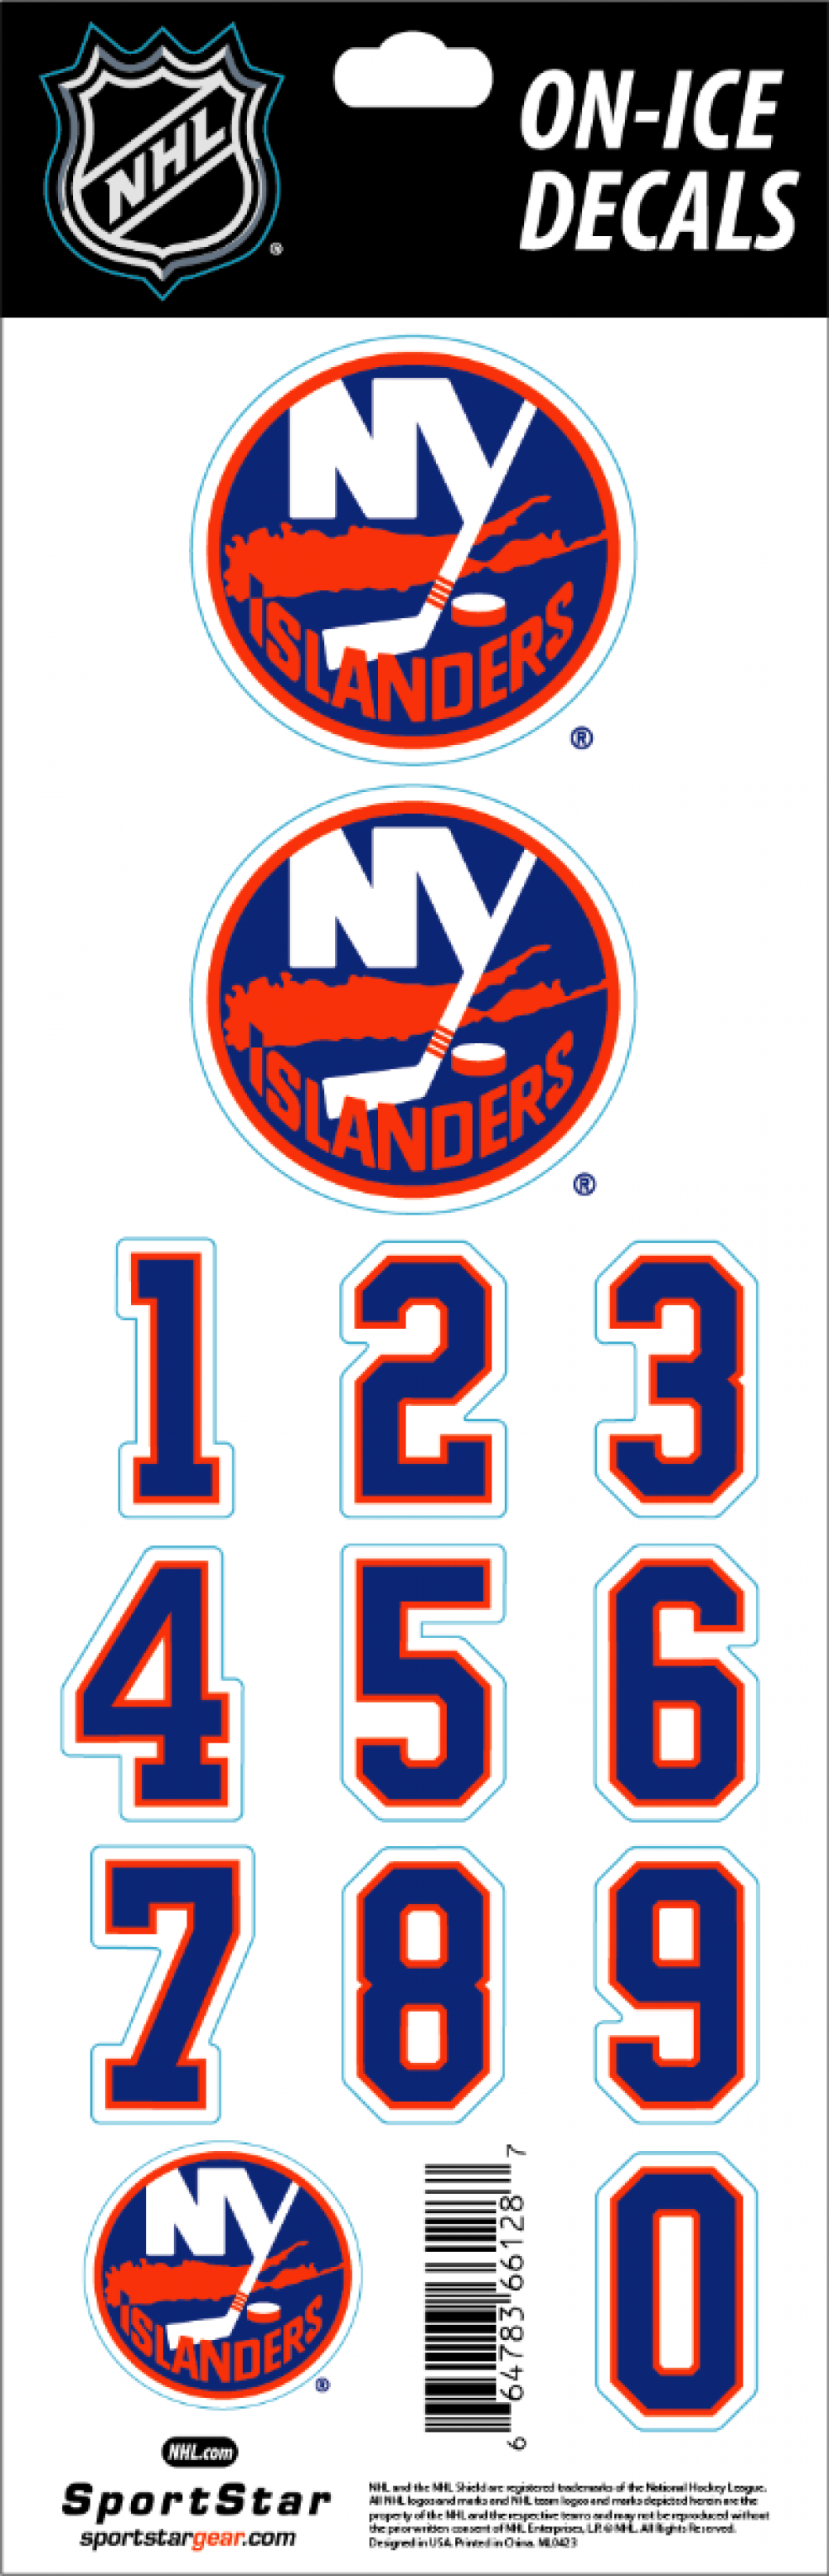 New York Islanders: Sparky 2021 Mascot - NHL Removable Wall Adhesive Wall Decal Large